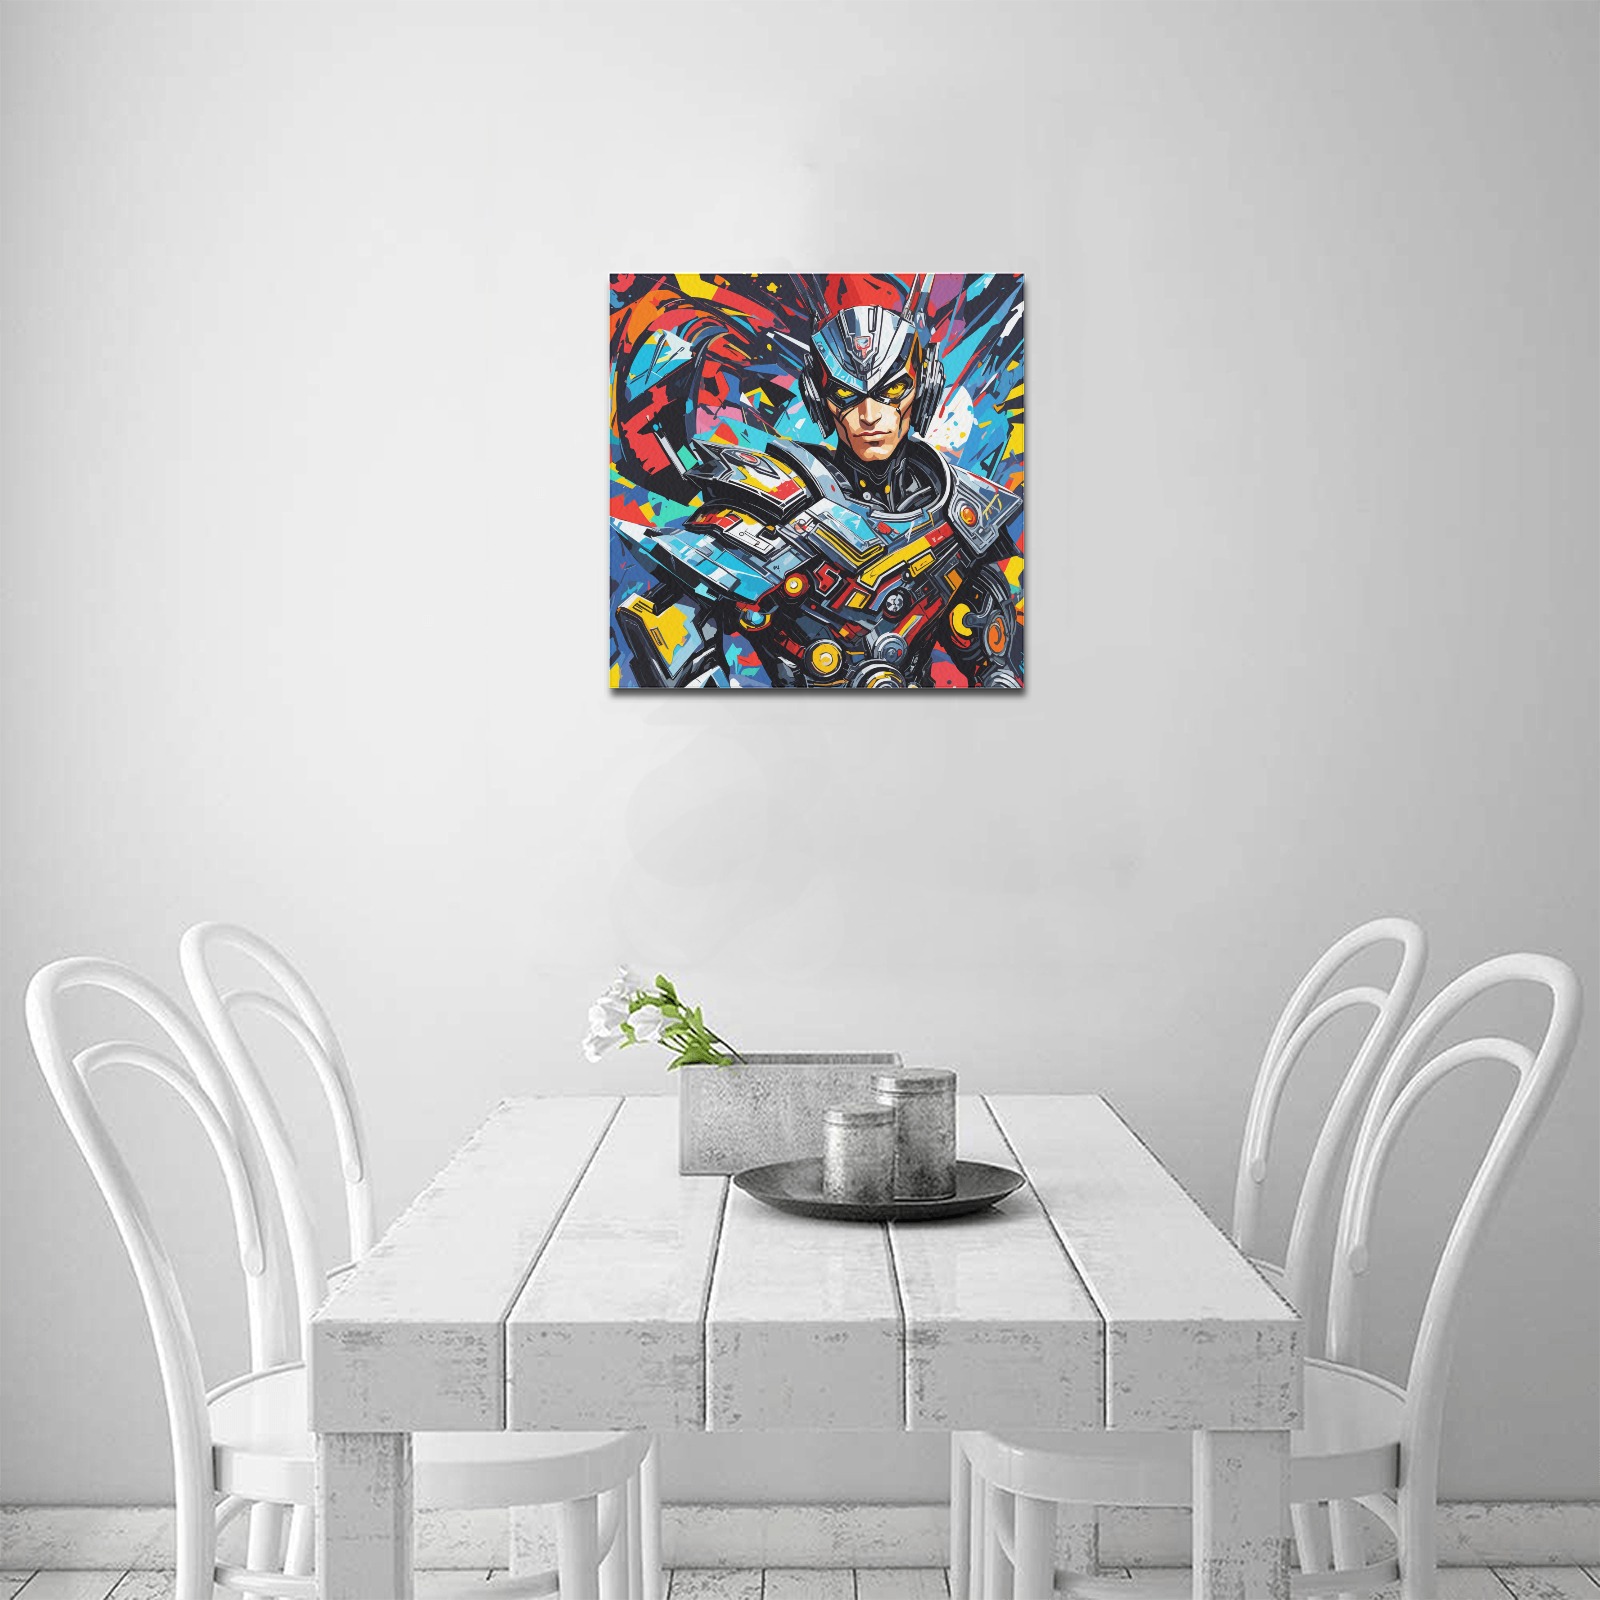 Awesome cyborg hero stunning modern abstract art. Upgraded Canvas Print 16"x16"